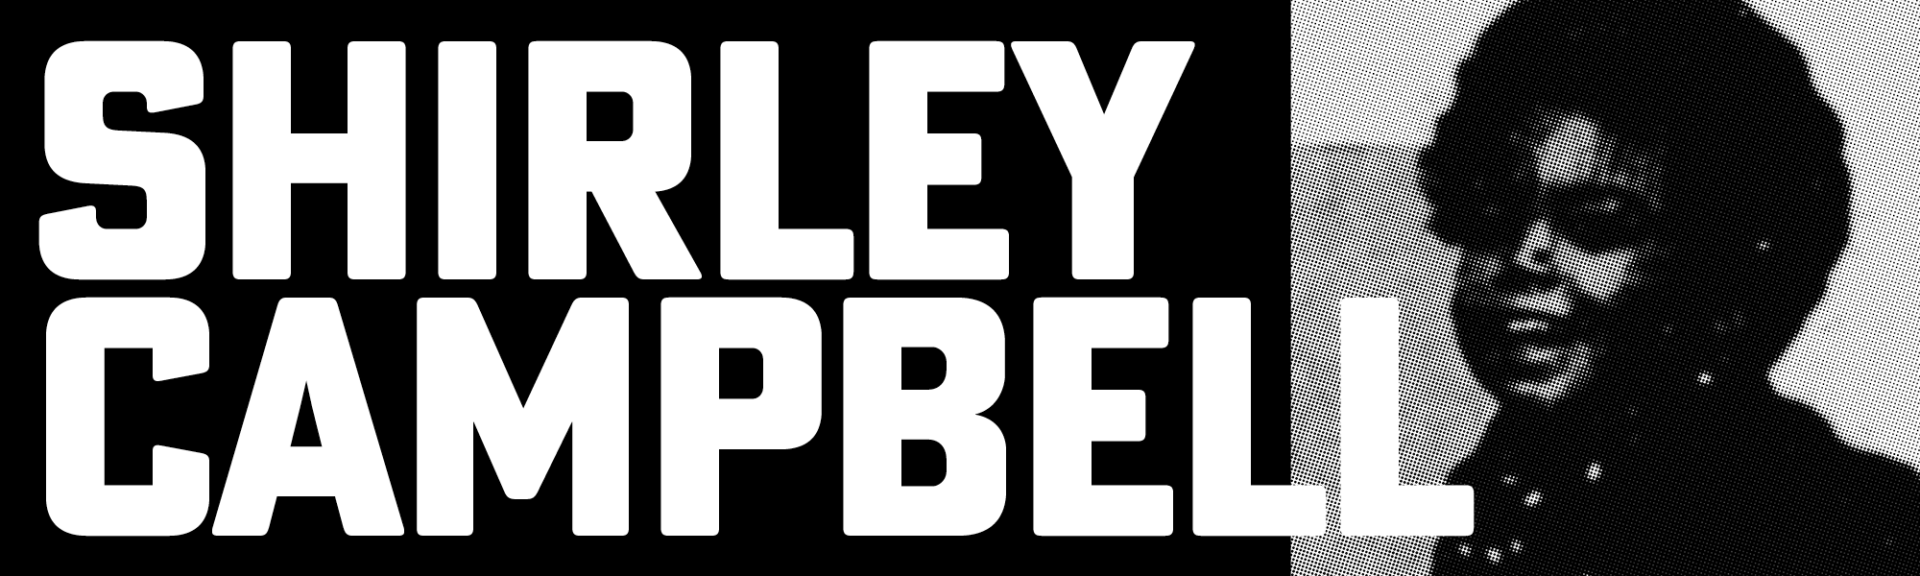 Shirley Campbell WEB Banner